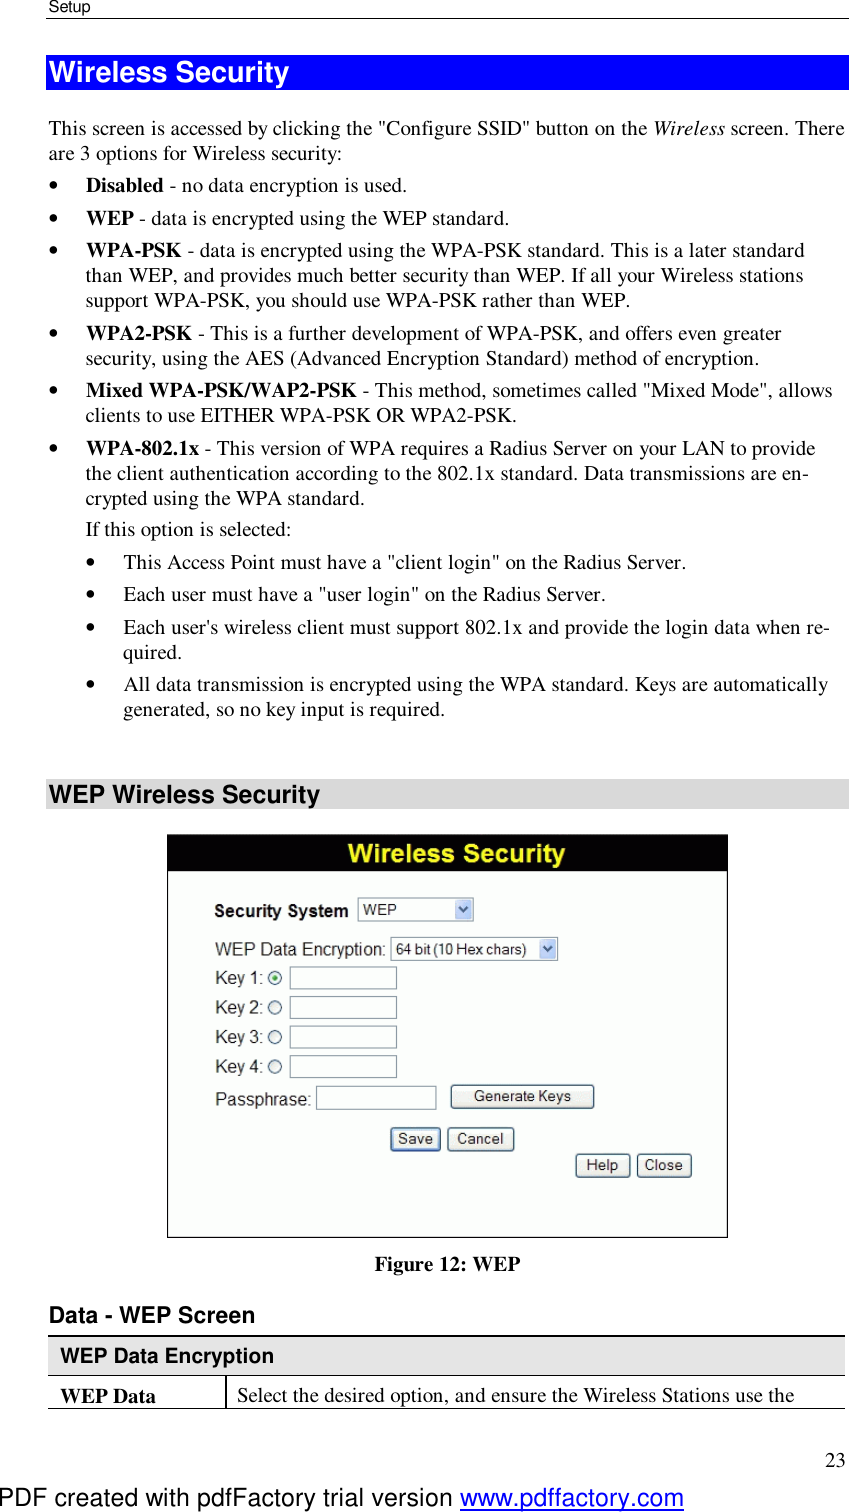 Setup 23 Wireless Security This screen is accessed by clicking the &quot;Configure SSID&quot; button on the Wireless screen. There are 3 options for Wireless security:  •  Disabled - no data encryption is used. •  WEP - data is encrypted using the WEP standard. •  WPA-PSK - data is encrypted using the WPA-PSK standard. This is a later standard than WEP, and provides much better security than WEP. If all your Wireless stations support WPA-PSK, you should use WPA-PSK rather than WEP. •  WPA2-PSK - This is a further development of WPA-PSK, and offers even greater security, using the AES (Advanced Encryption Standard) method of encryption. •  Mixed WPA-PSK/WAP2-PSK - This method, sometimes called &quot;Mixed Mode&quot;, allows clients to use EITHER WPA-PSK OR WPA2-PSK. •  WPA-802.1x - This version of WPA requires a Radius Server on your LAN to provide the client authentication according to the 802.1x standard. Data transmissions are en-crypted using the WPA standard.  If this option is selected:  •  This Access Point must have a &quot;client login&quot; on the Radius Server.  •  Each user must have a &quot;user login&quot; on the Radius Server.  •  Each user&apos;s wireless client must support 802.1x and provide the login data when re-quired.  •  All data transmission is encrypted using the WPA standard. Keys are automatically generated, so no key input is required.   WEP Wireless Security  Figure 12: WEP Data - WEP Screen WEP Data Encryption WEP Data  Select the desired option, and ensure the Wireless Stations use the PDF created with pdfFactory trial version www.pdffactory.com